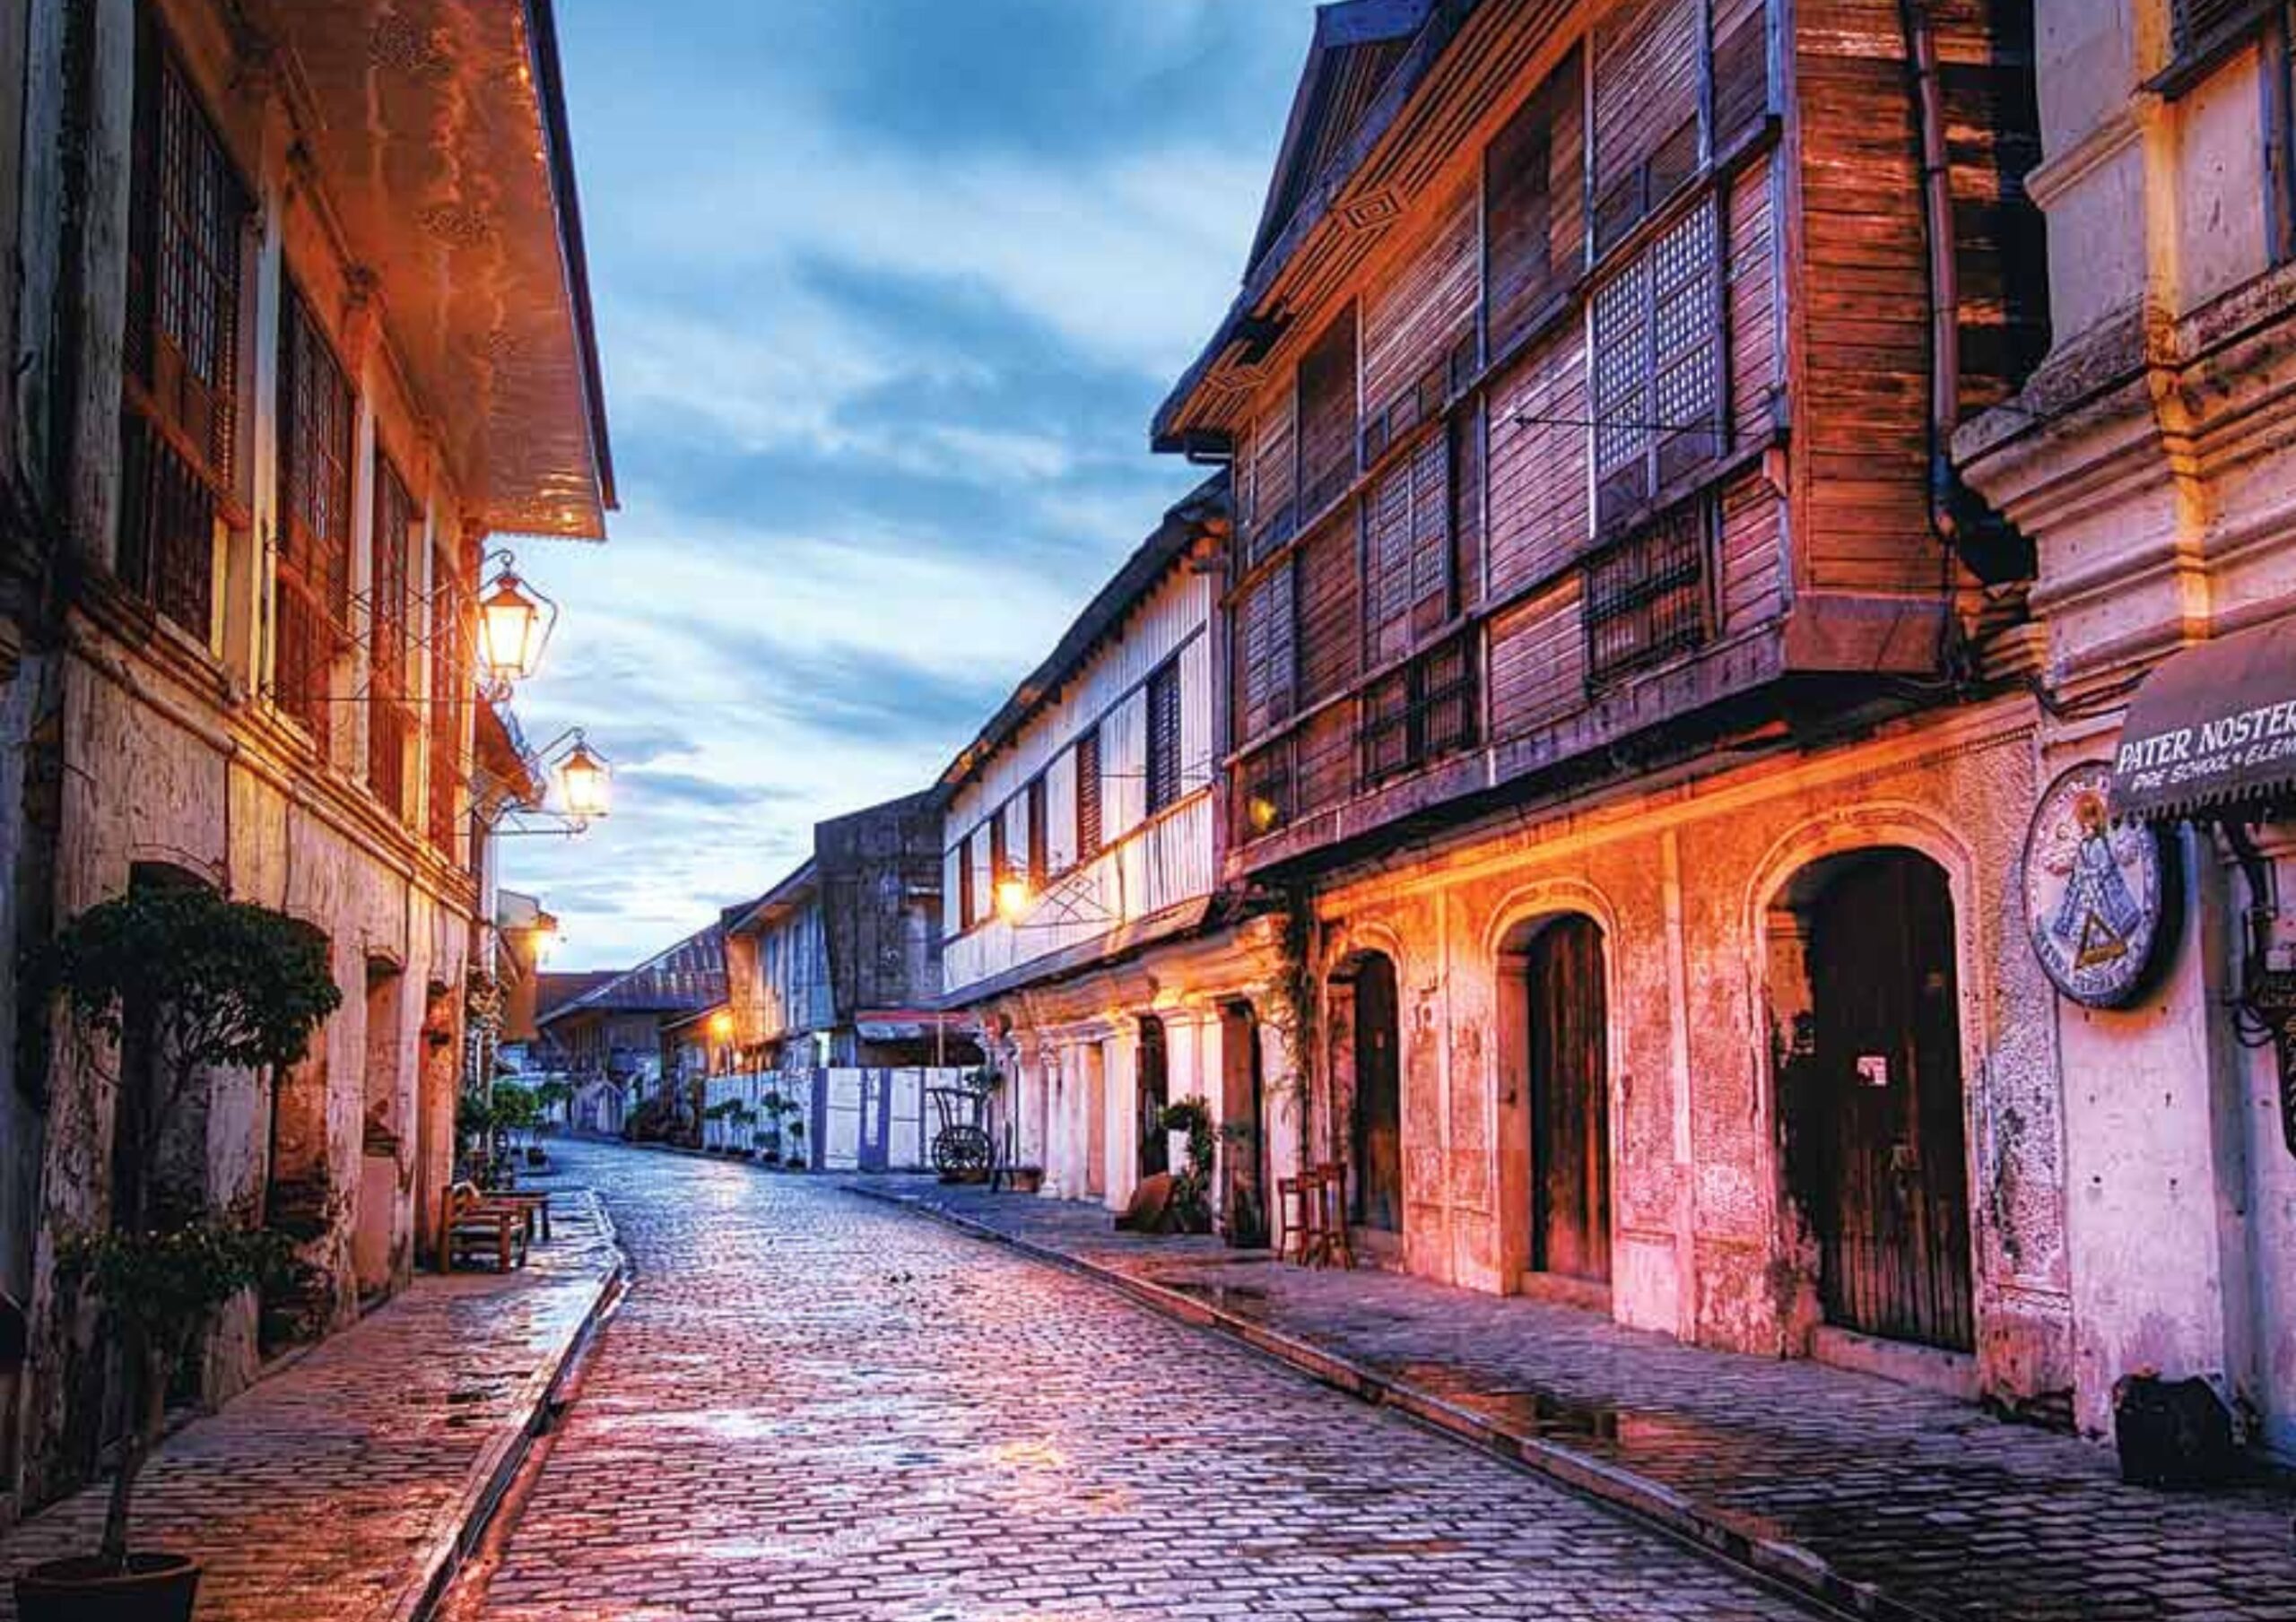 A street lined with heritage buildings in one of the historical places in the Philippines.